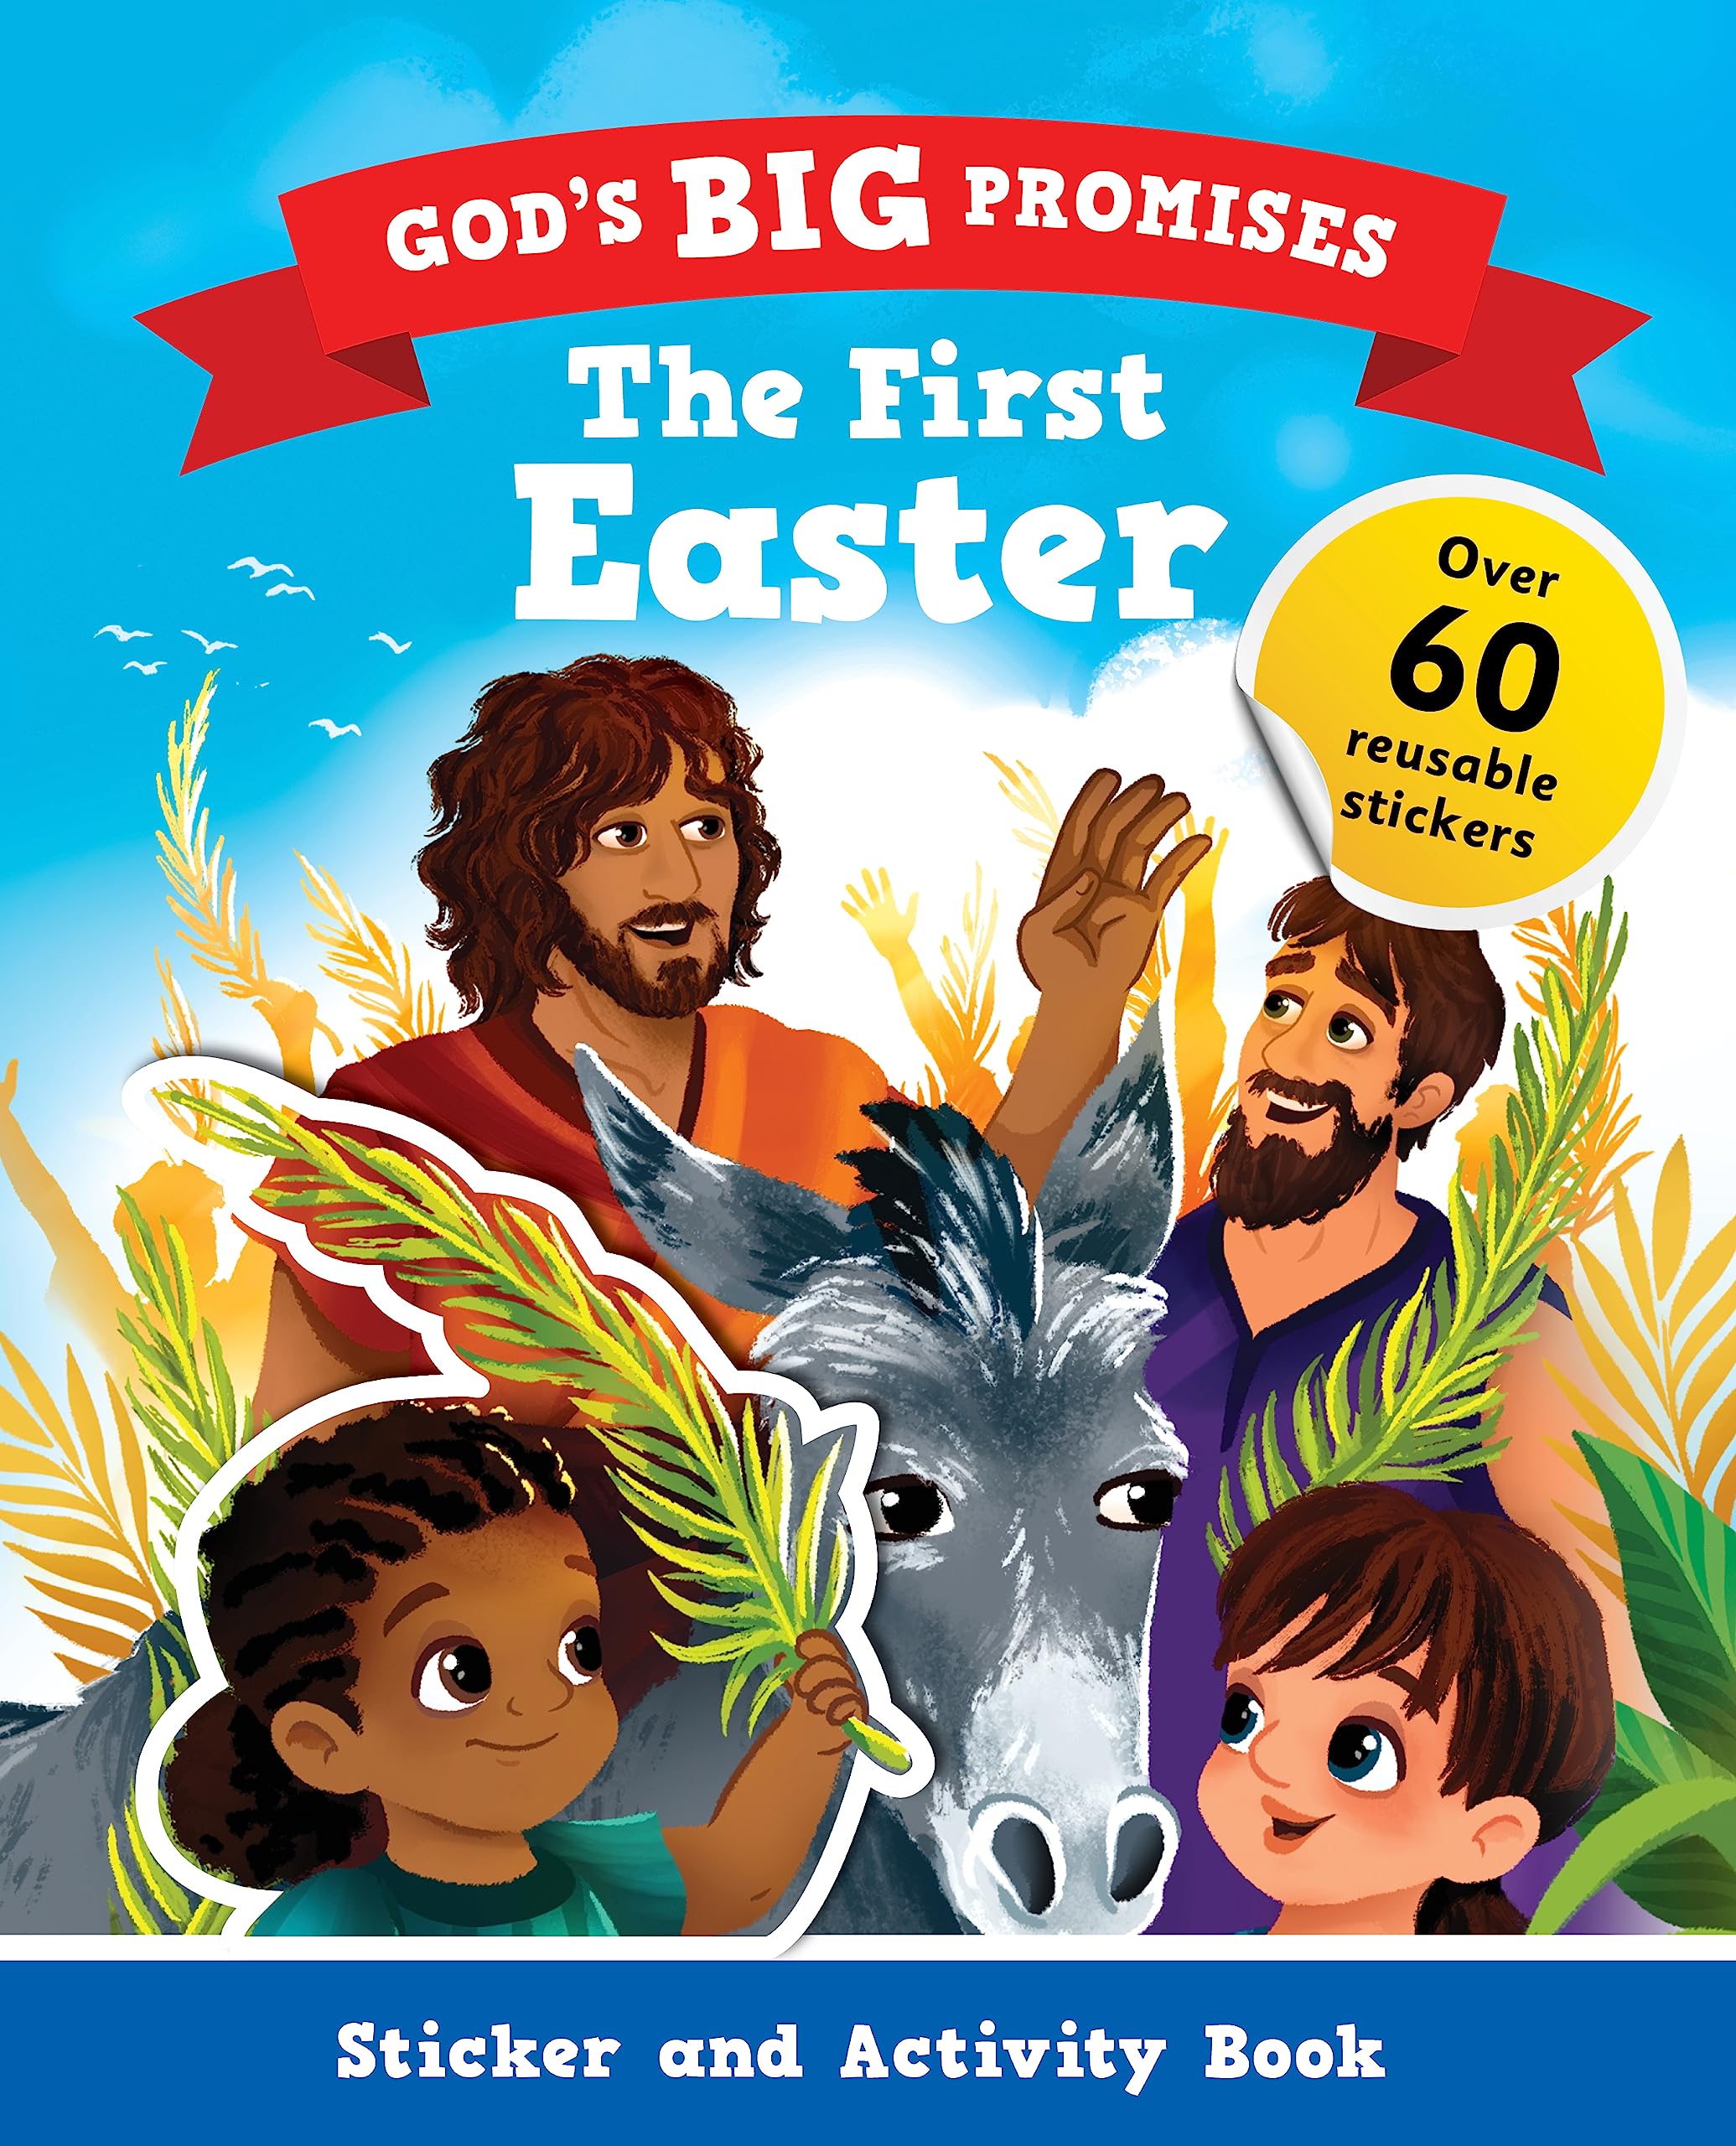 God's Big Promises Easter Sticker and Activity Book (Christian Bible interactive book, gift for kids ages 3-7, based on God's Big Promises Bible Storybook.)